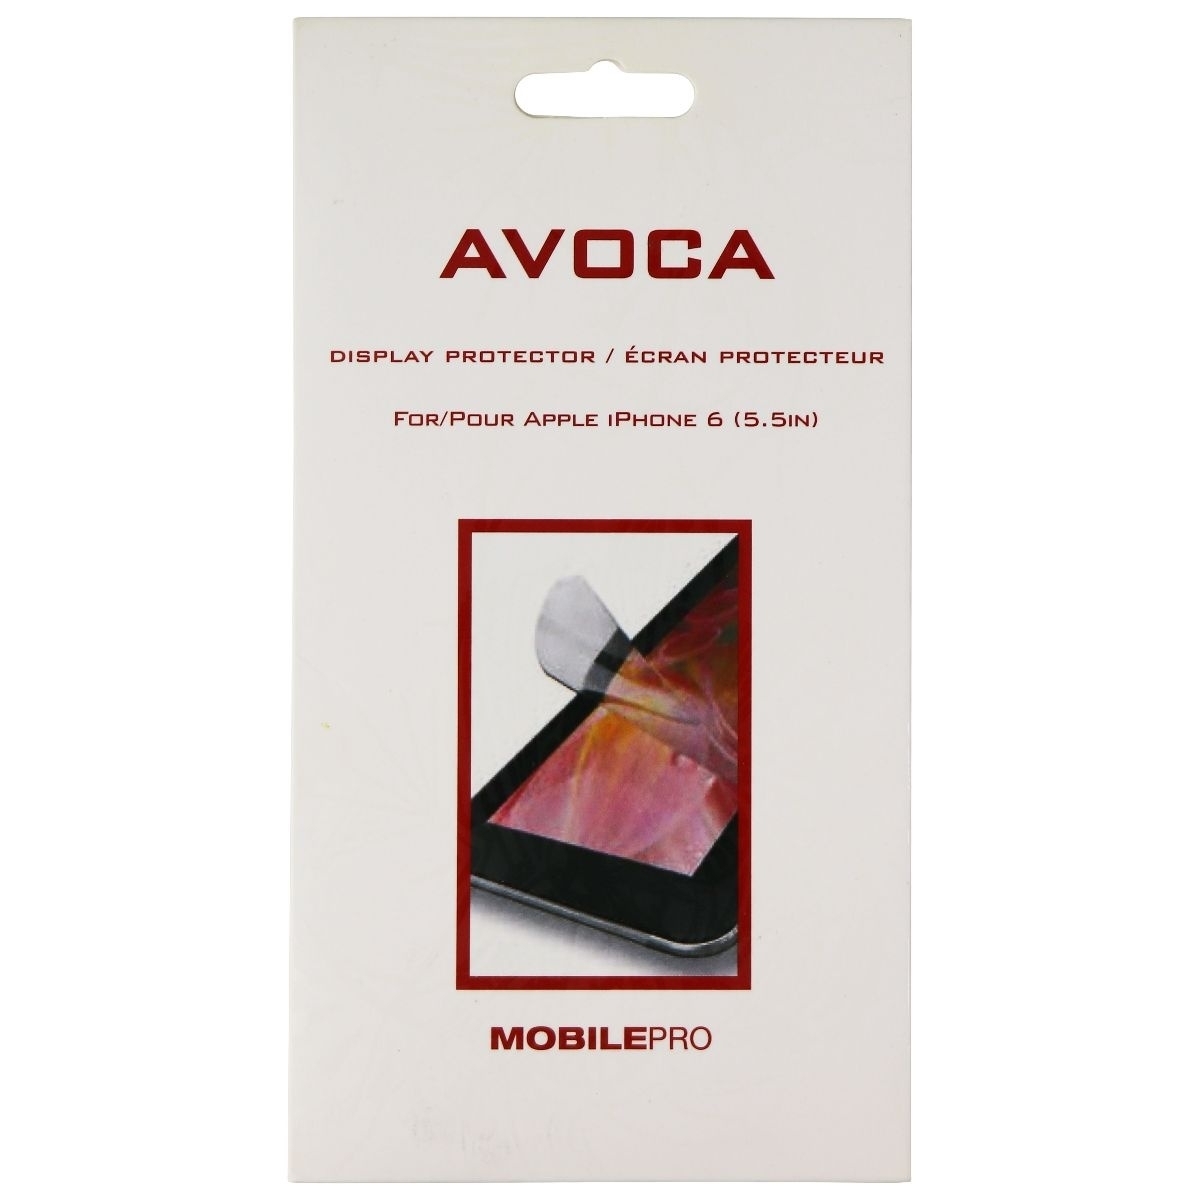 Avoca MobilePro Display Protector 2 Pack For Apple IPhone 6 Smartphone - Clear